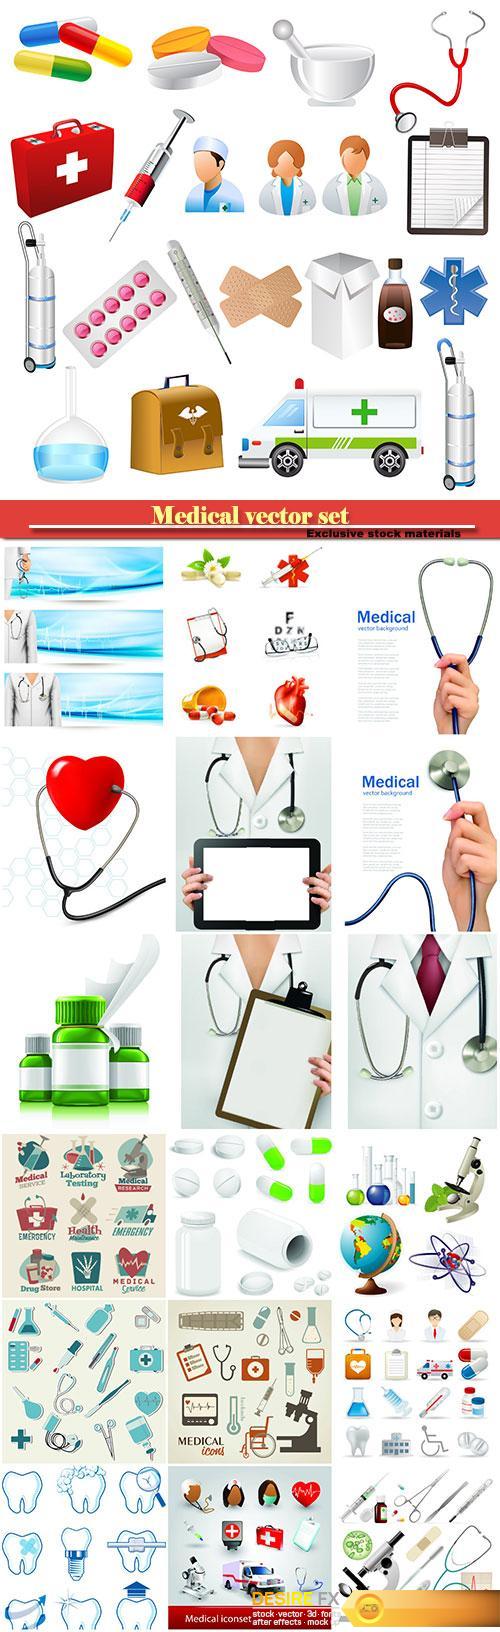 Medical vector set, icons and elements